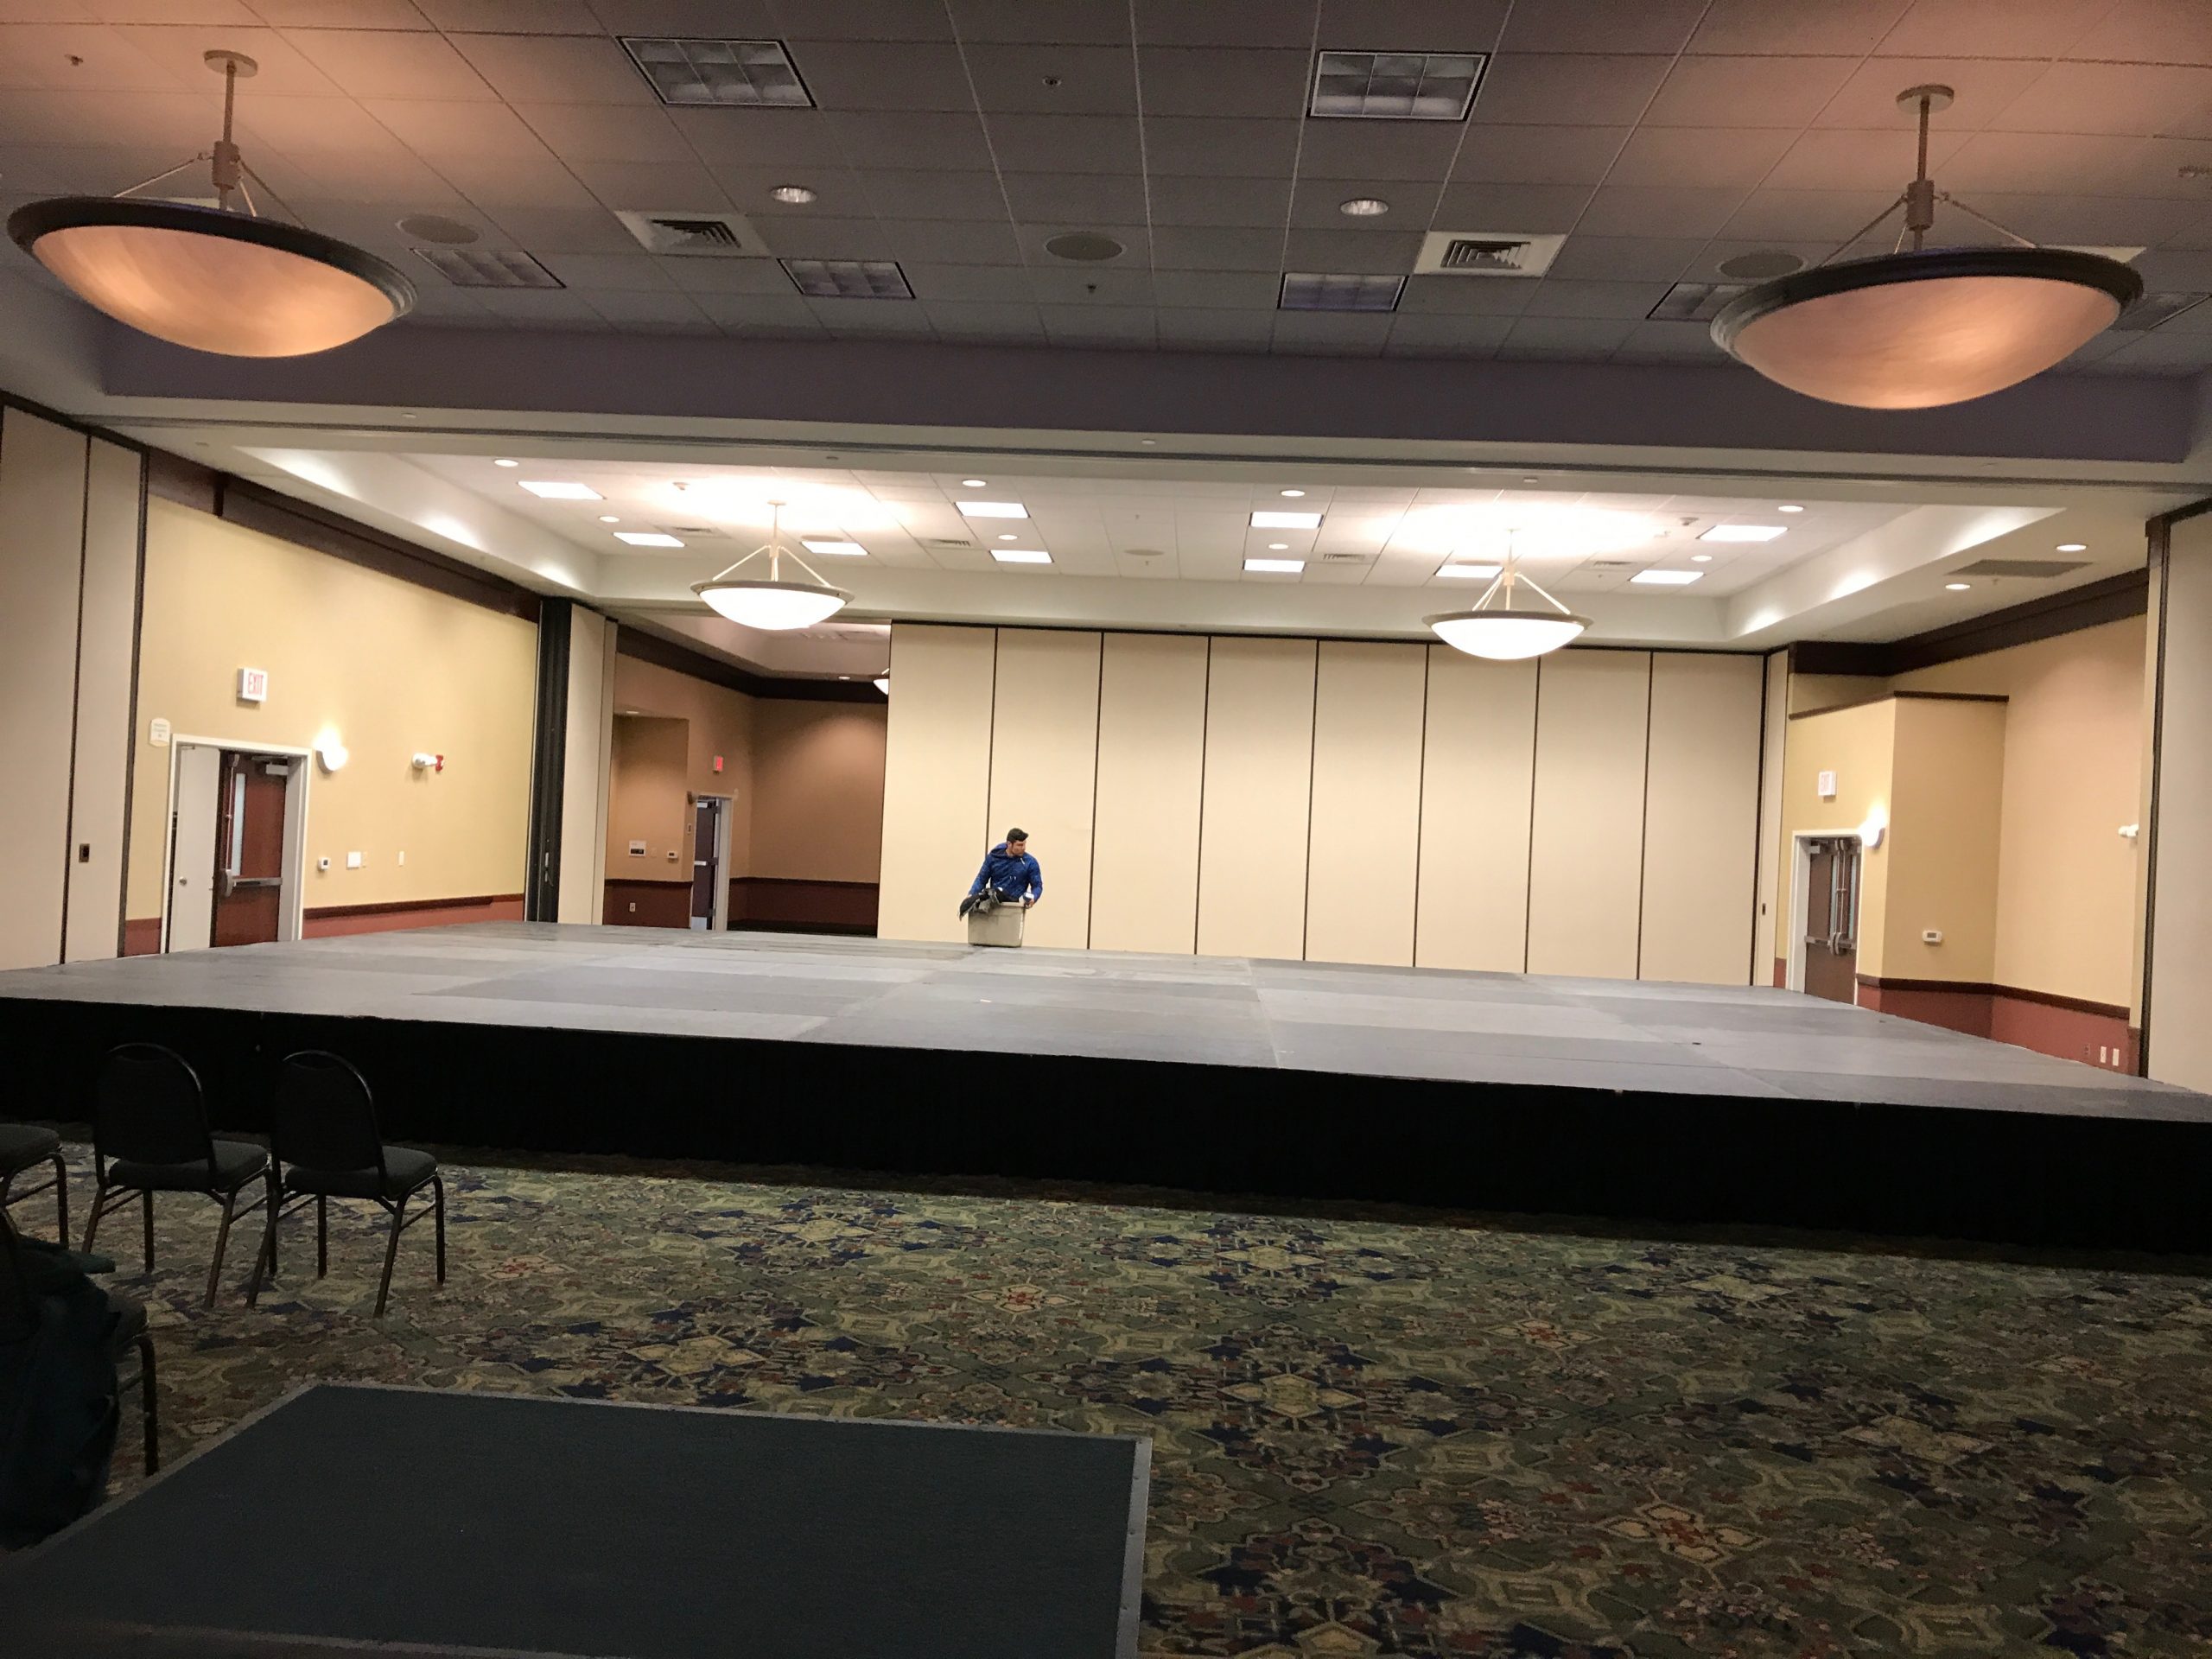 40' x 28' stage on 24 legs for Xpression Dance in Ankeny, Iowa